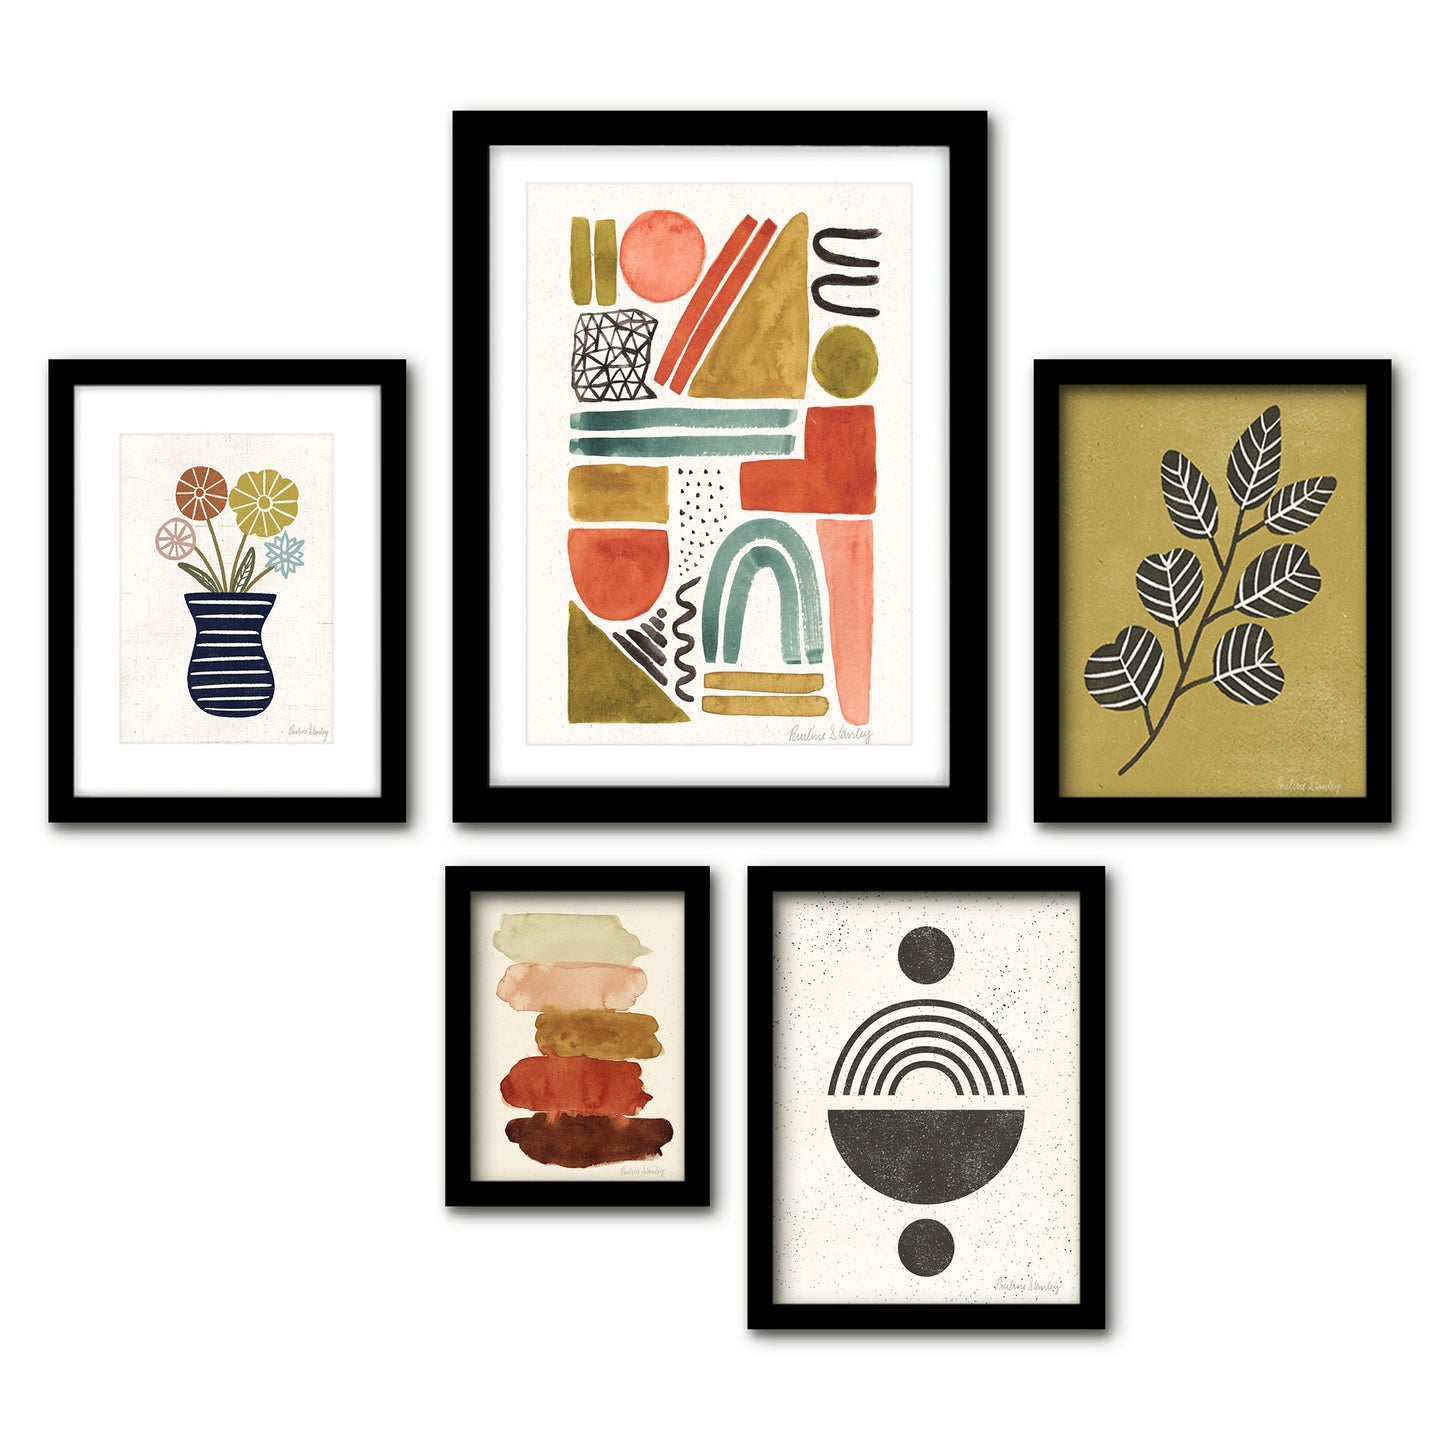 Americanflat 5 Piece Black Framed Gallery Wall Art Set - Colorful Abstract Floral Shapes